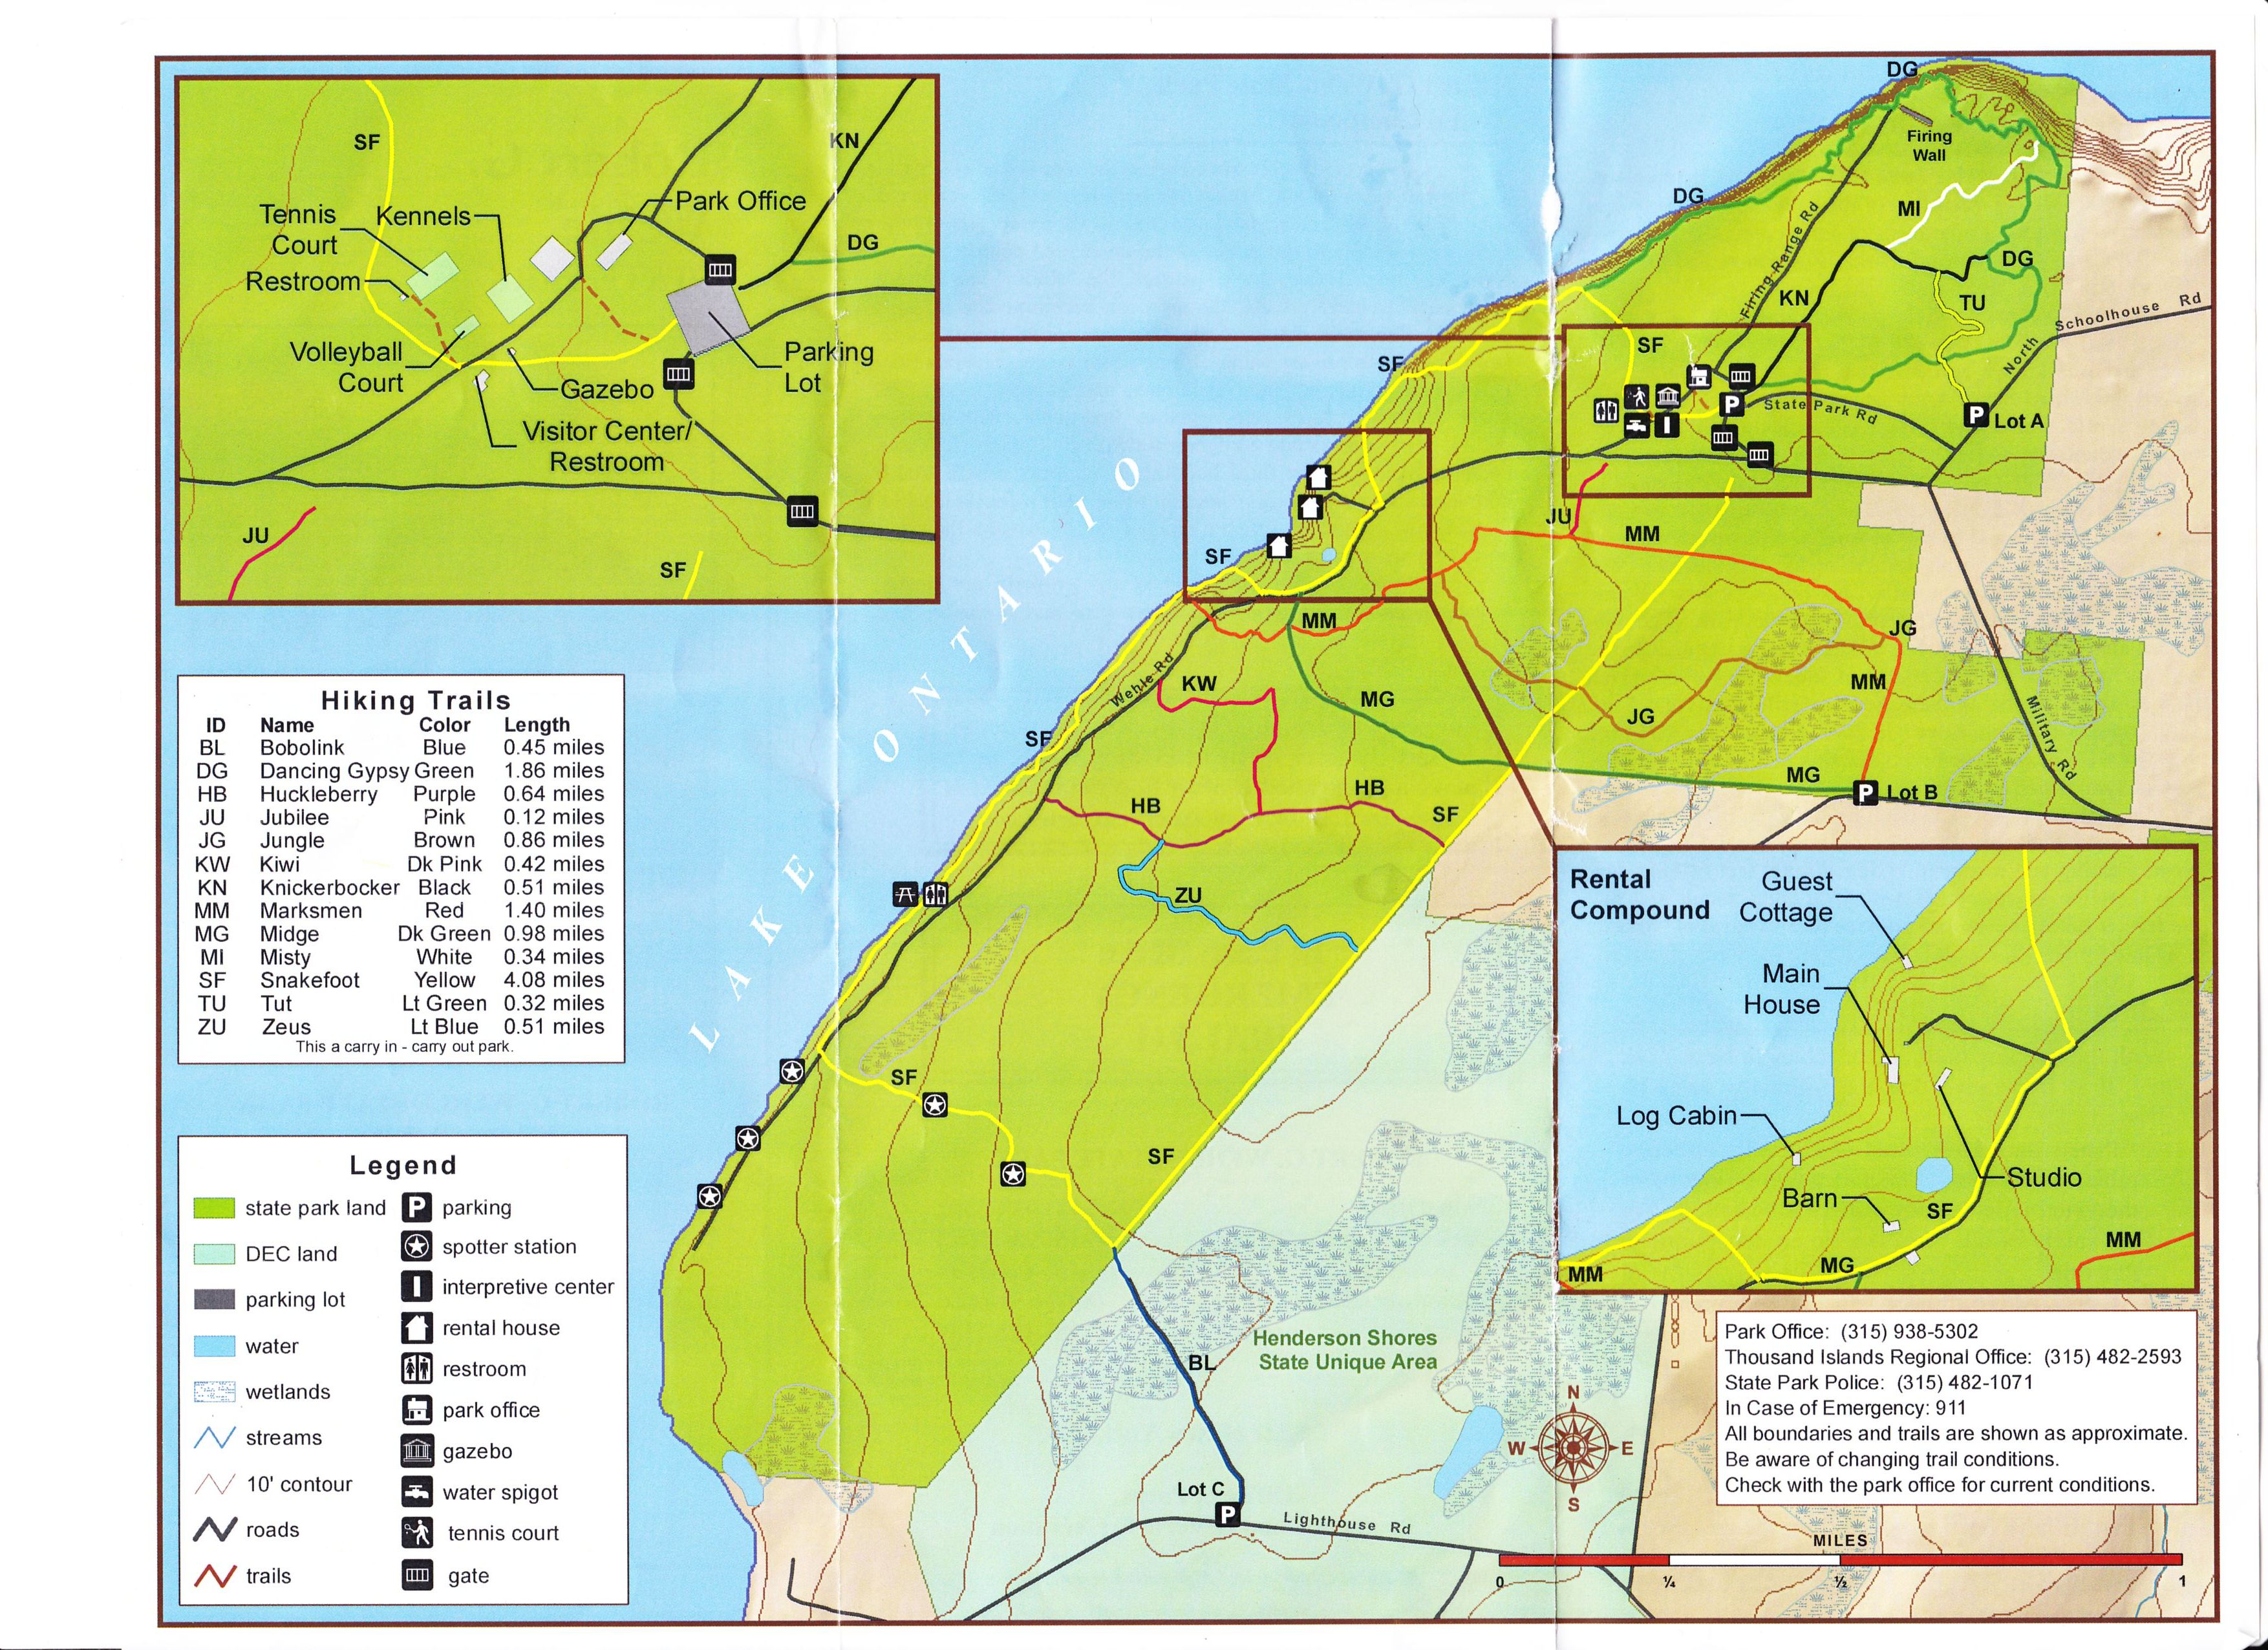 Trails map from the park brochure, right-click to save full-size version